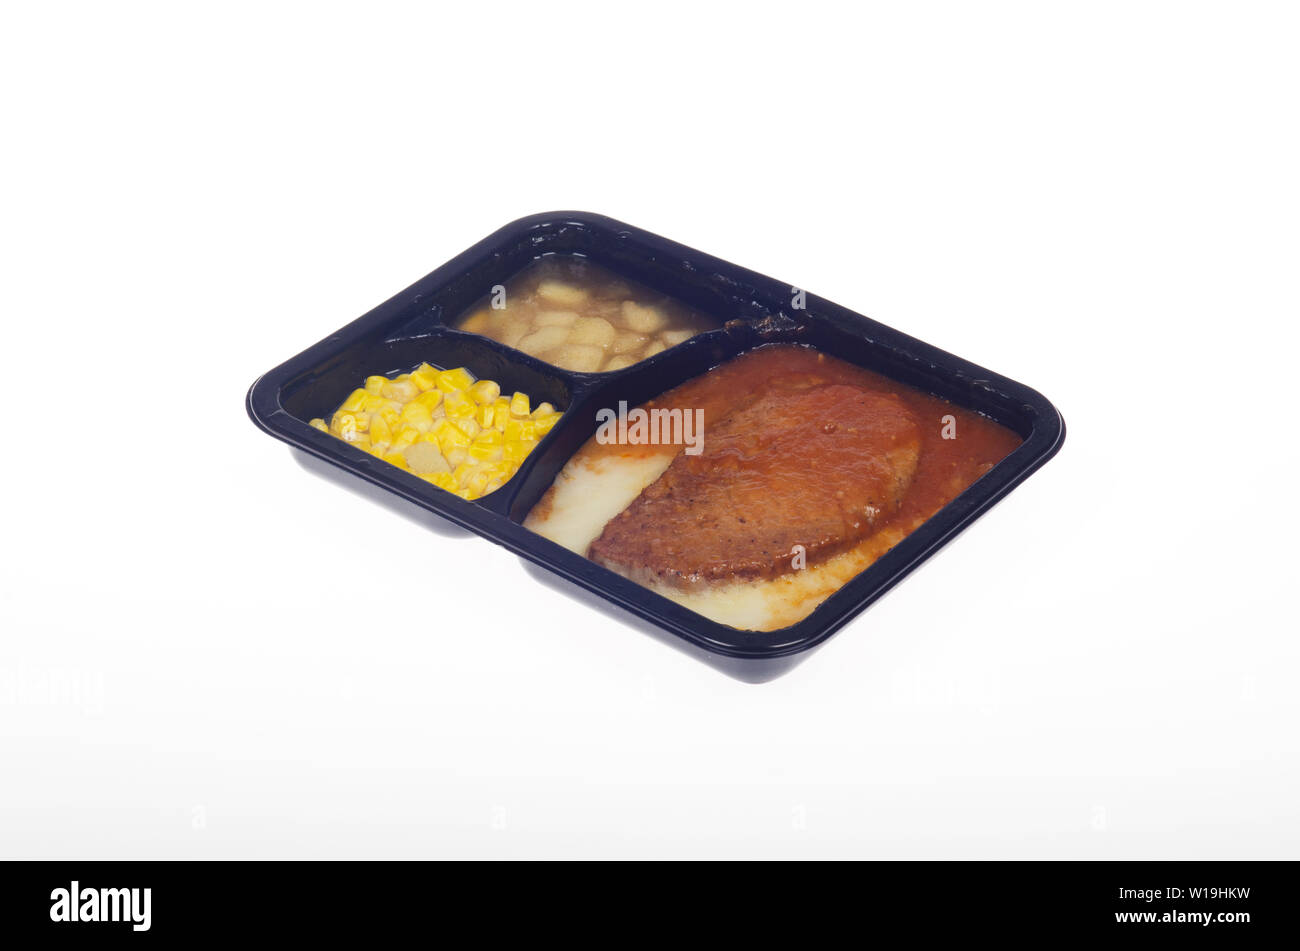 Hot cooked tv dinner in microwaveable tray meatloaf, mashed potatoes, gravy, sweet corn and cinnamon apple dessert Stock Photo